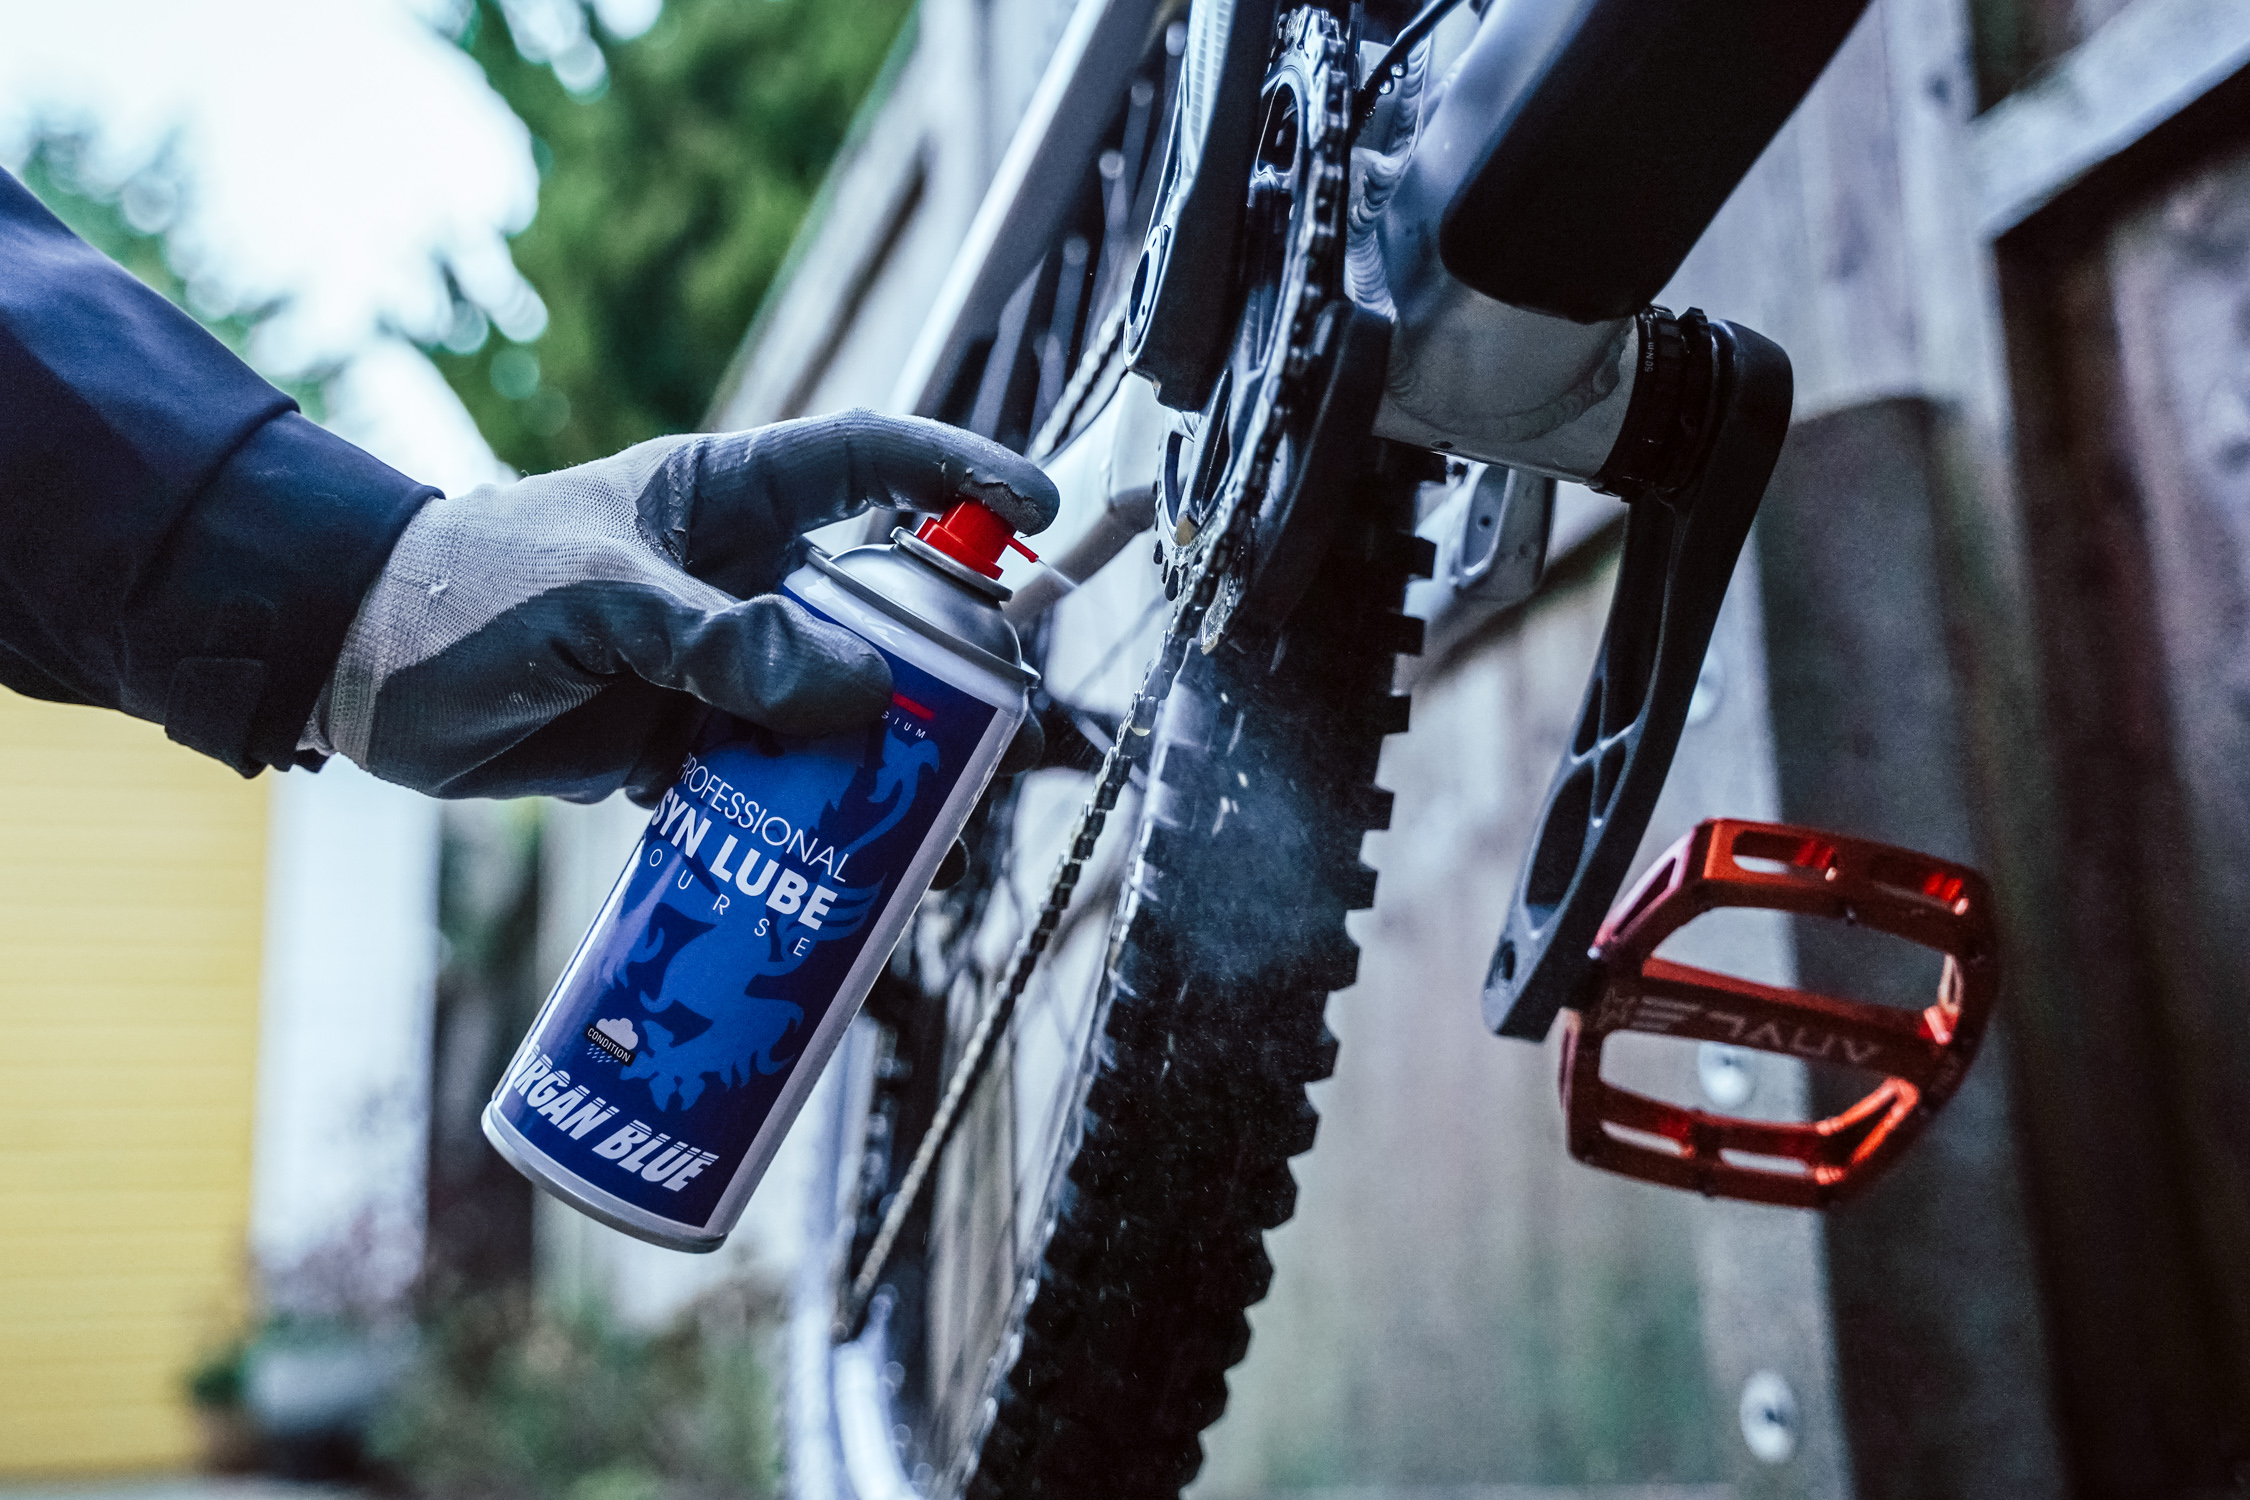 How to clean your mountain bike - Morgan Blue Syn Lube